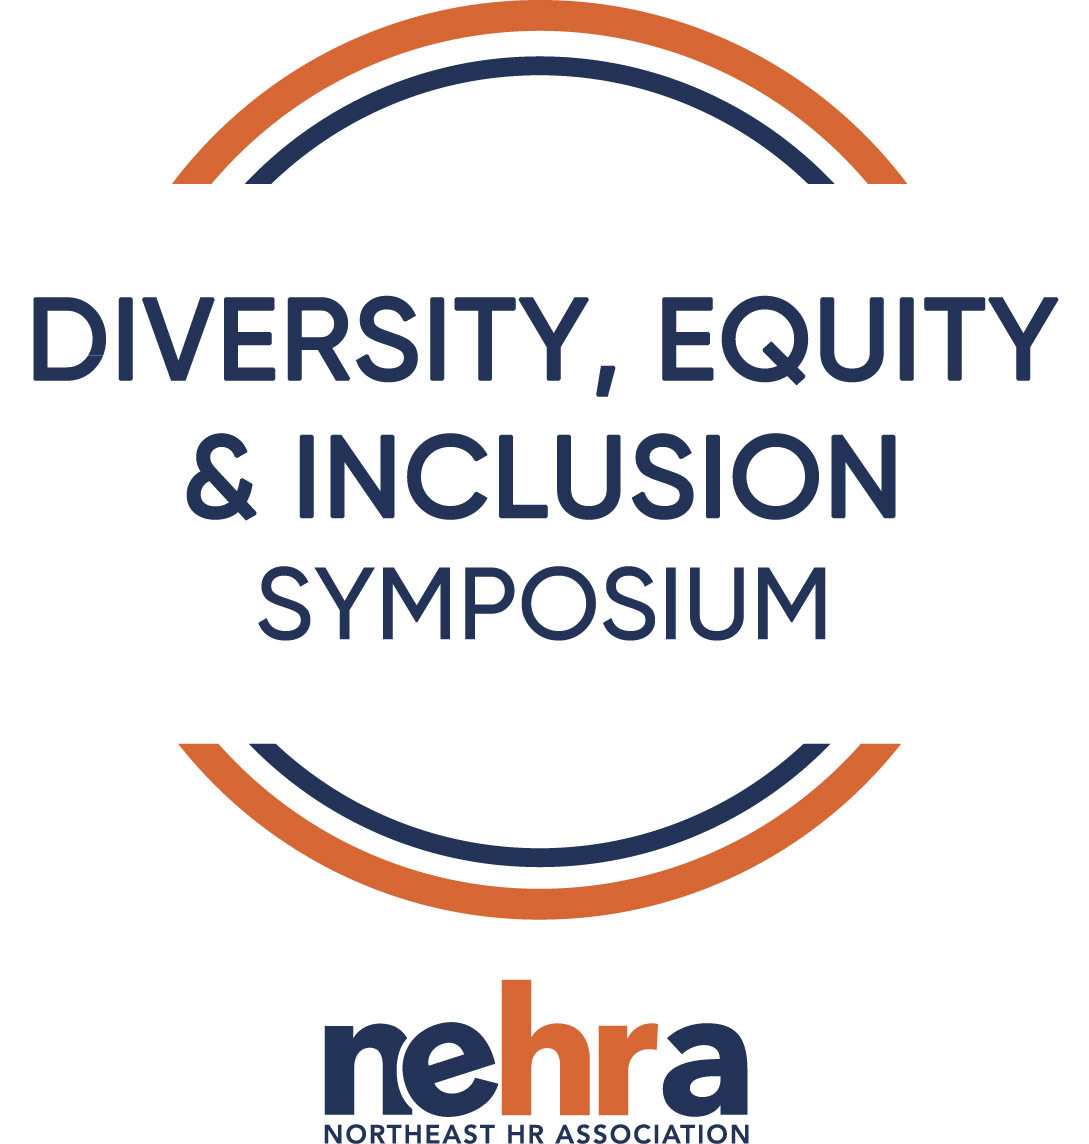 NEHRA's Diversity, Equity and Inclusion Symposium - December 9, 2021 - Norwood, MA